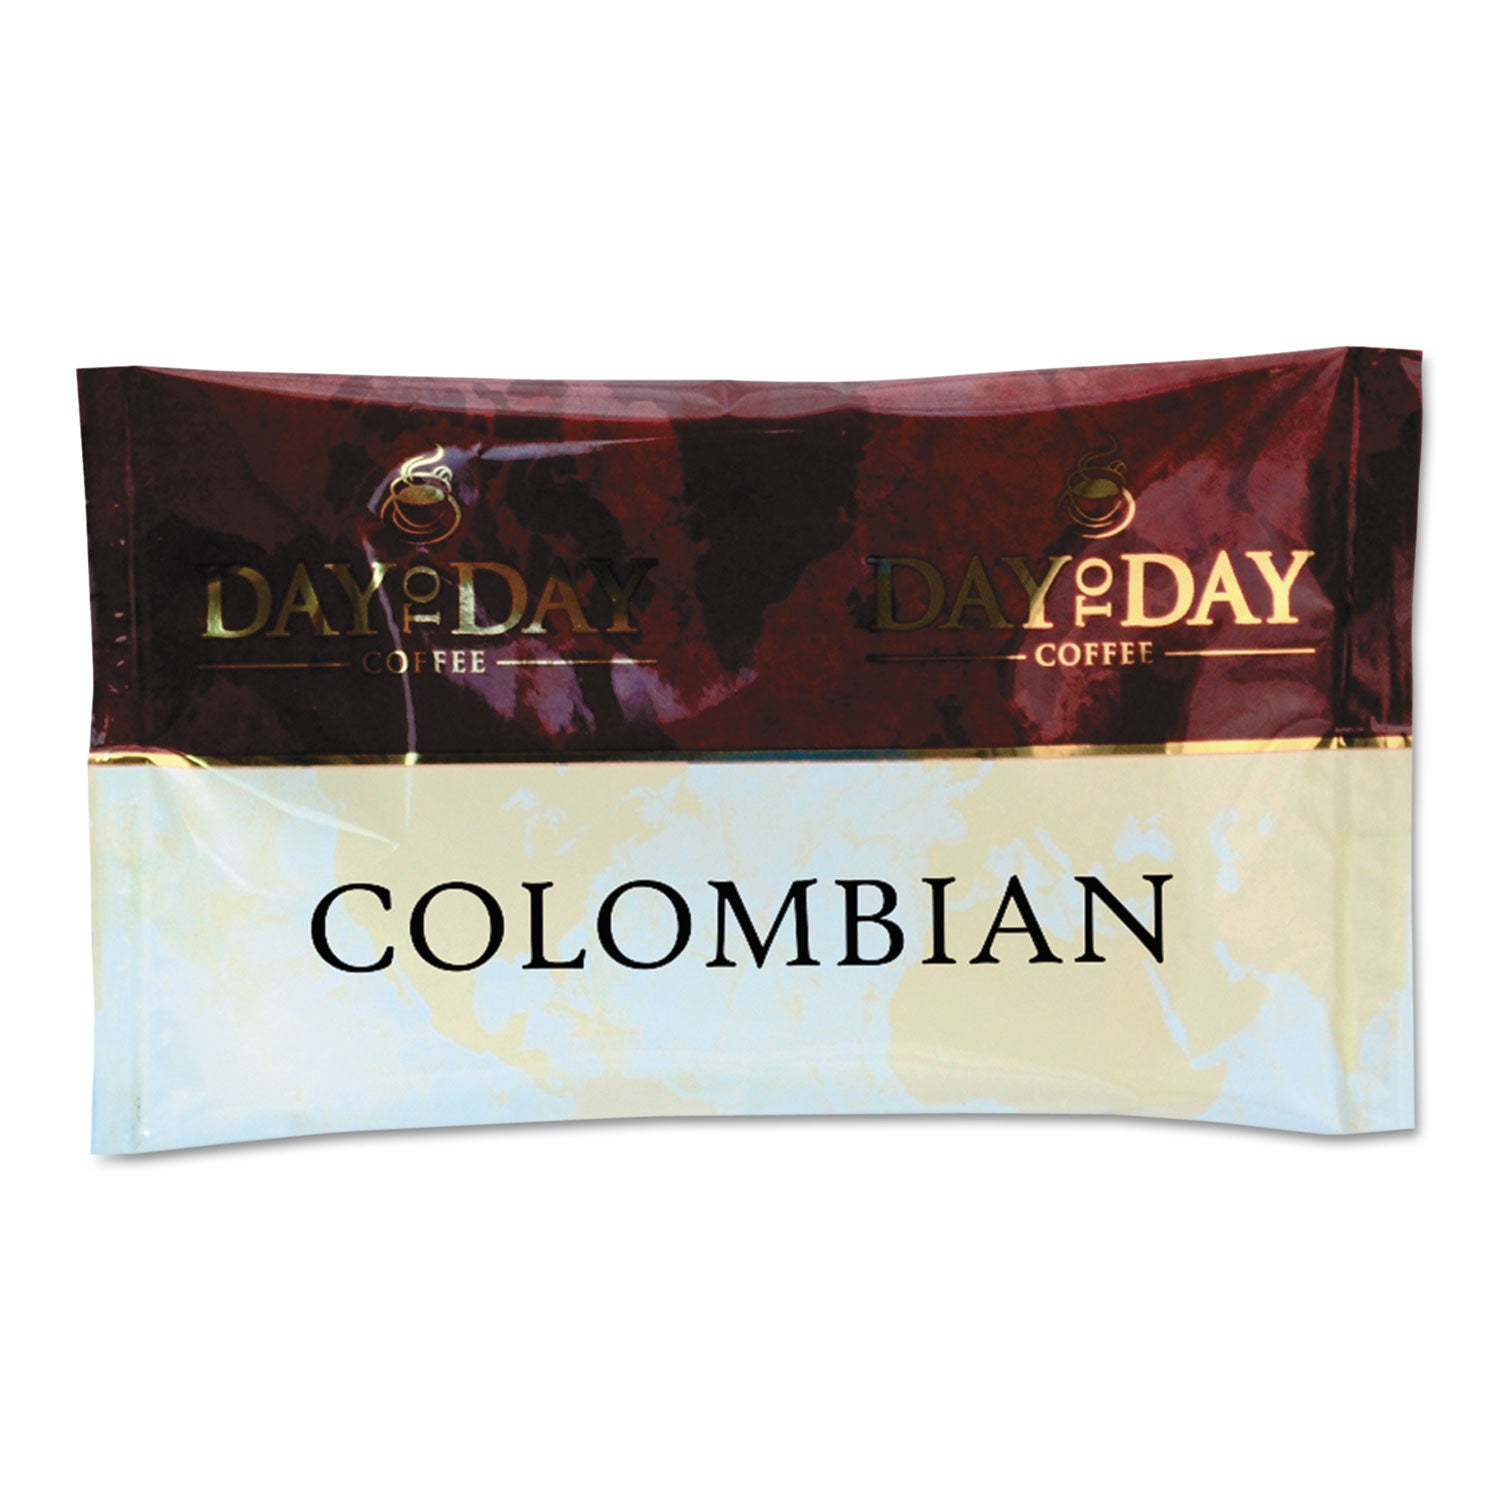 100% Pure Coffee, Colombian Blend, 1.5 oz Pack, 42 Packs/Carton - 